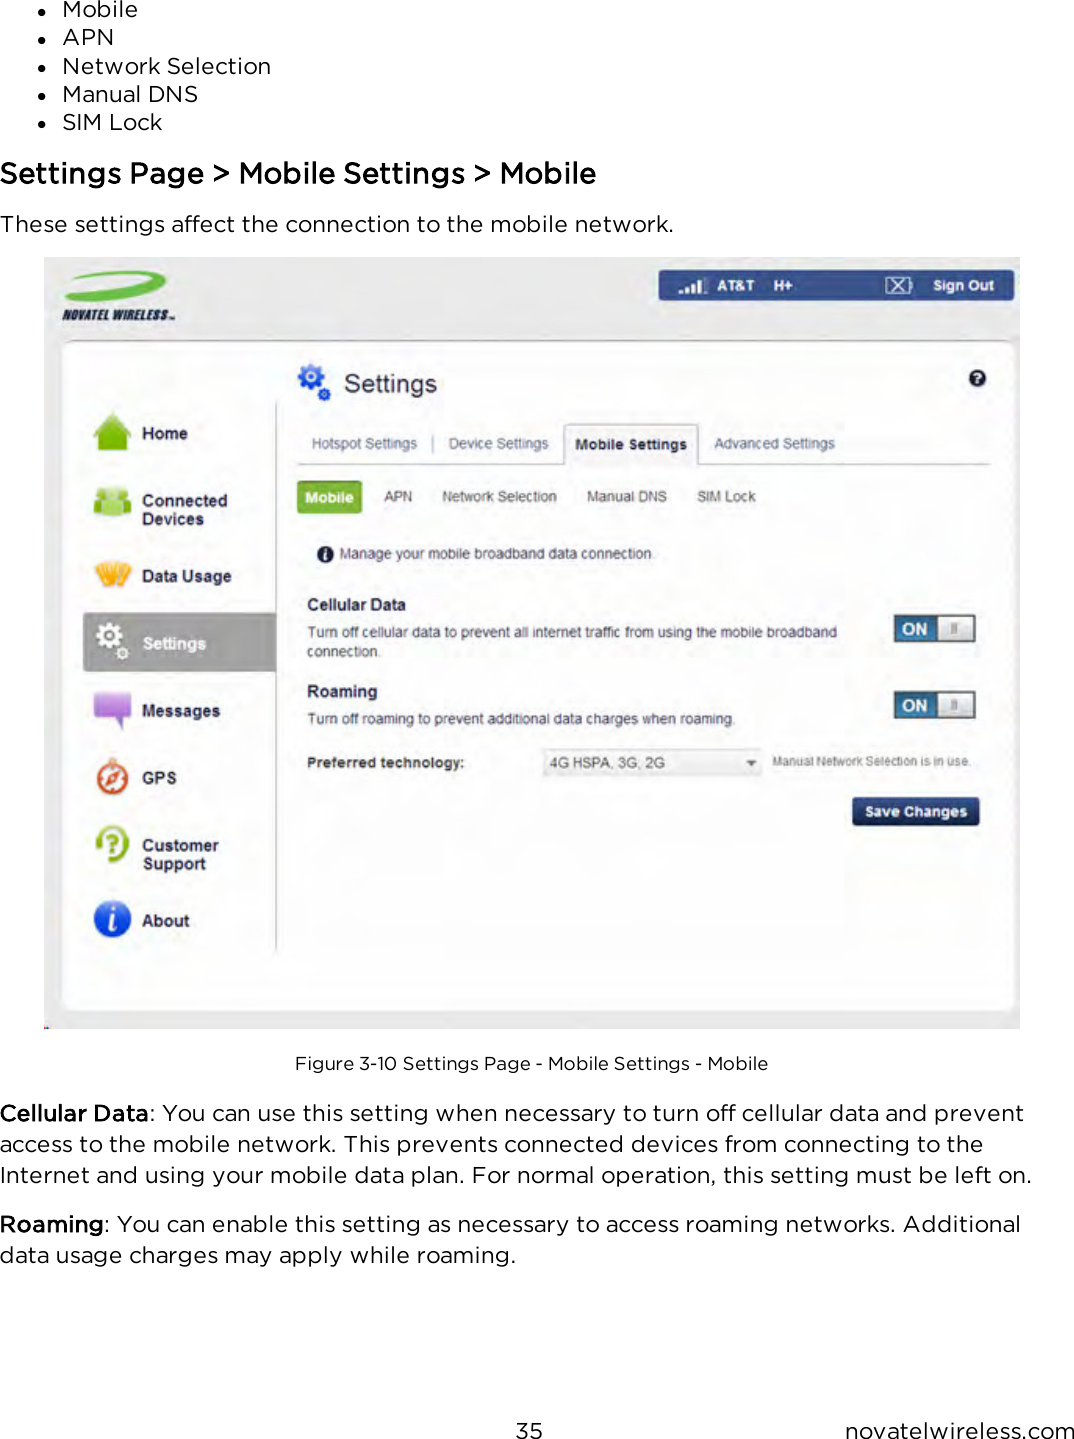 35 novatelwireless.comlMobilelAPNlNetwork SelectionlManual DNSlSIM LockSettings Page &gt; Mobile Settings &gt; MobileThese settings affect the connection to the mobile network.Figure 3-10 Settings Page - Mobile Settings - MobileCellular Data: You can use this setting when necessary to turn off cellular data and preventaccess to the mobile network. This prevents connected devices from connecting to theInternet and using your mobile data plan. For normal operation, this setting must be left on.Roaming: You can enable this setting as necessary to access roaming networks. Additionaldata usage charges may apply while roaming.